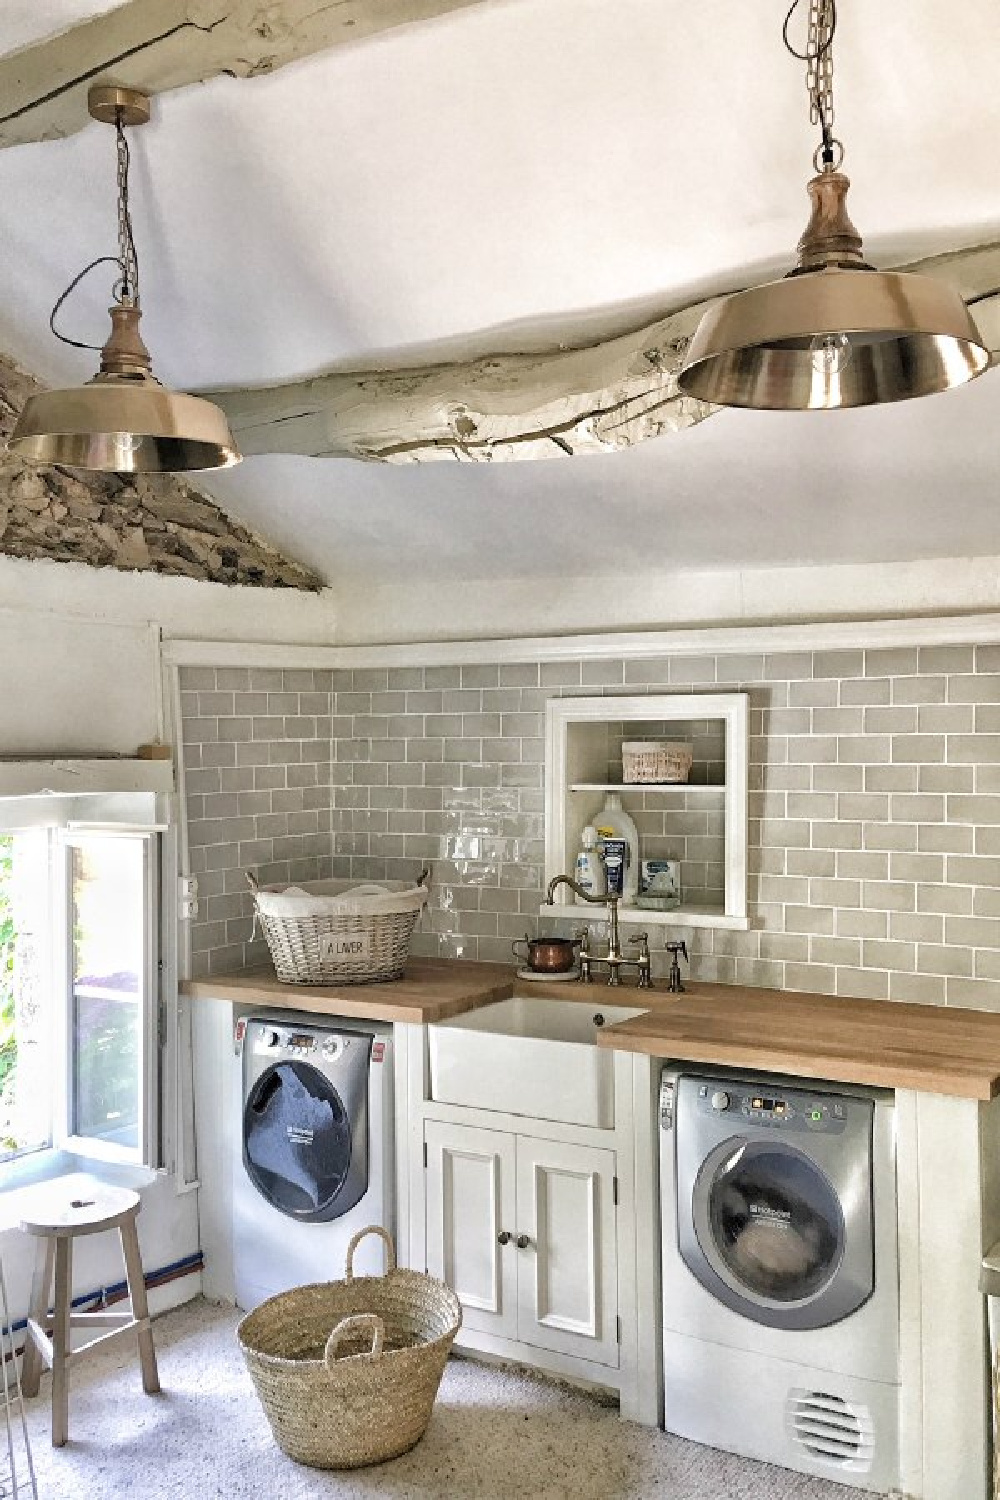 Beautiful rustic French farmhouse laundry room - Vivi et Margot. #frenchcountry #laundryrooms